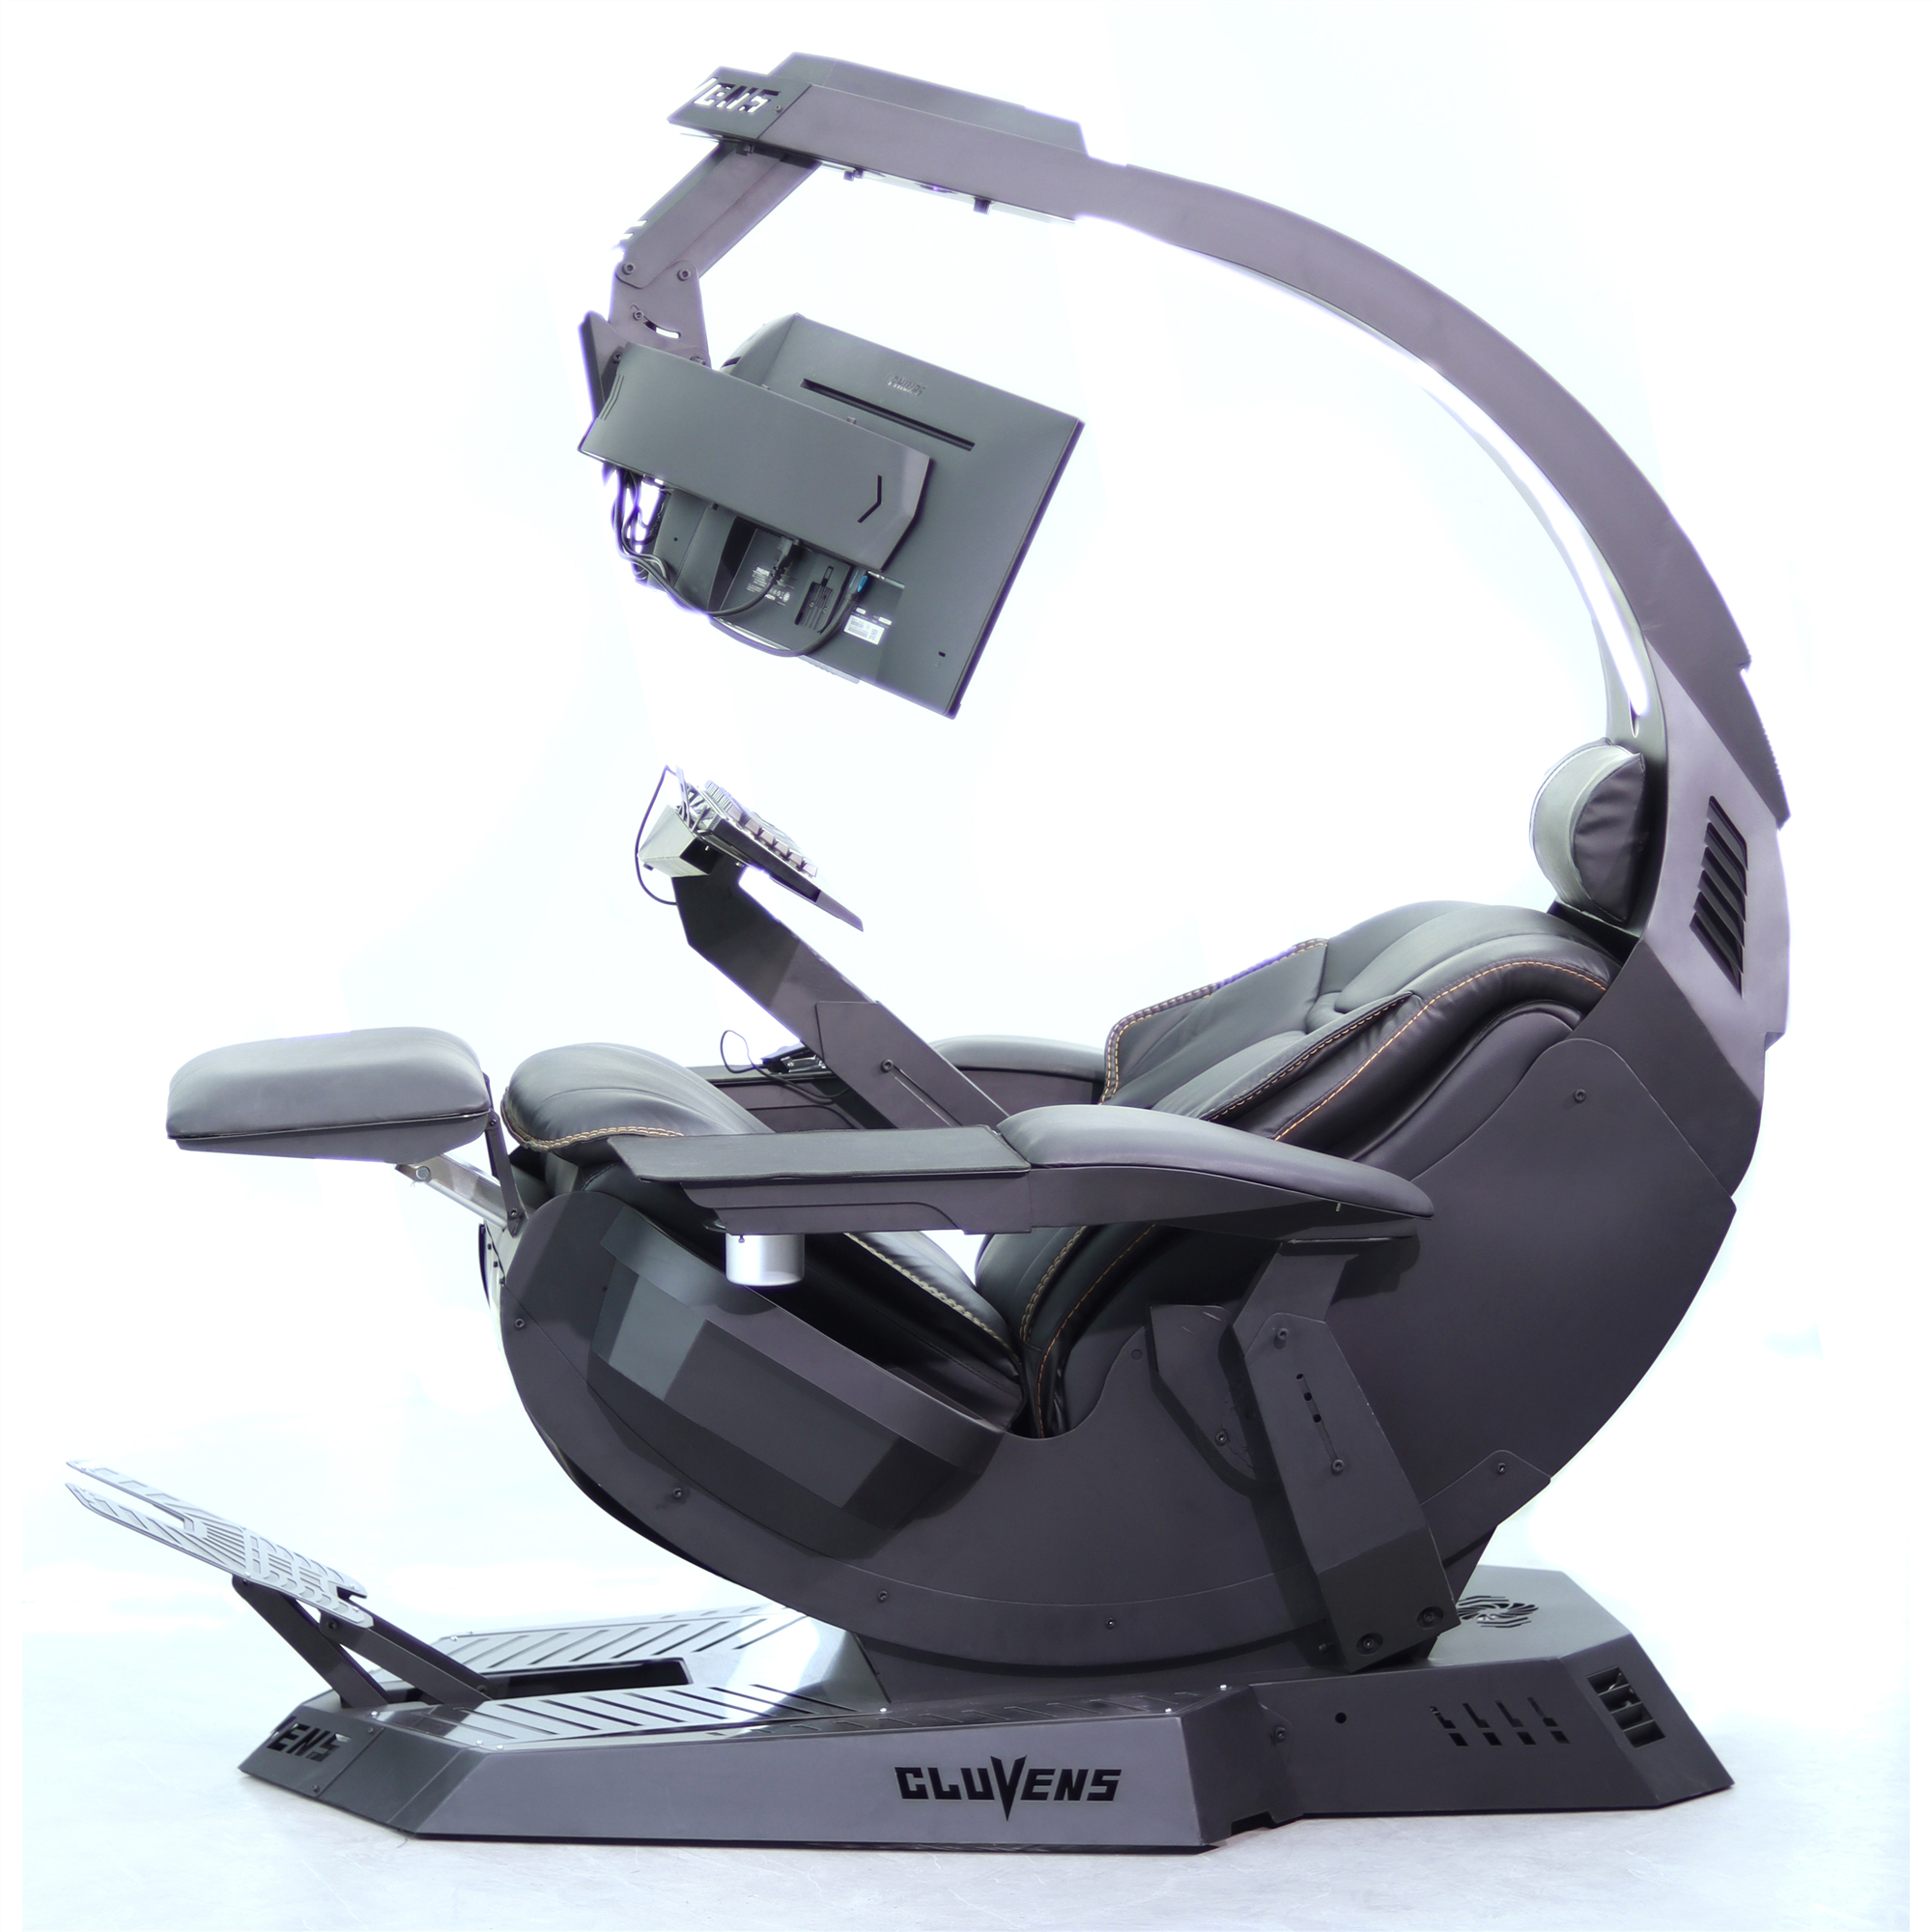 2023 Cluvens Unicorn 2.0 - Zero Gravity Genuine Leather Boss executive high back Chair cockpit Gaming cockpit support upto 5 screens empower productivity and comfort and health for computer users